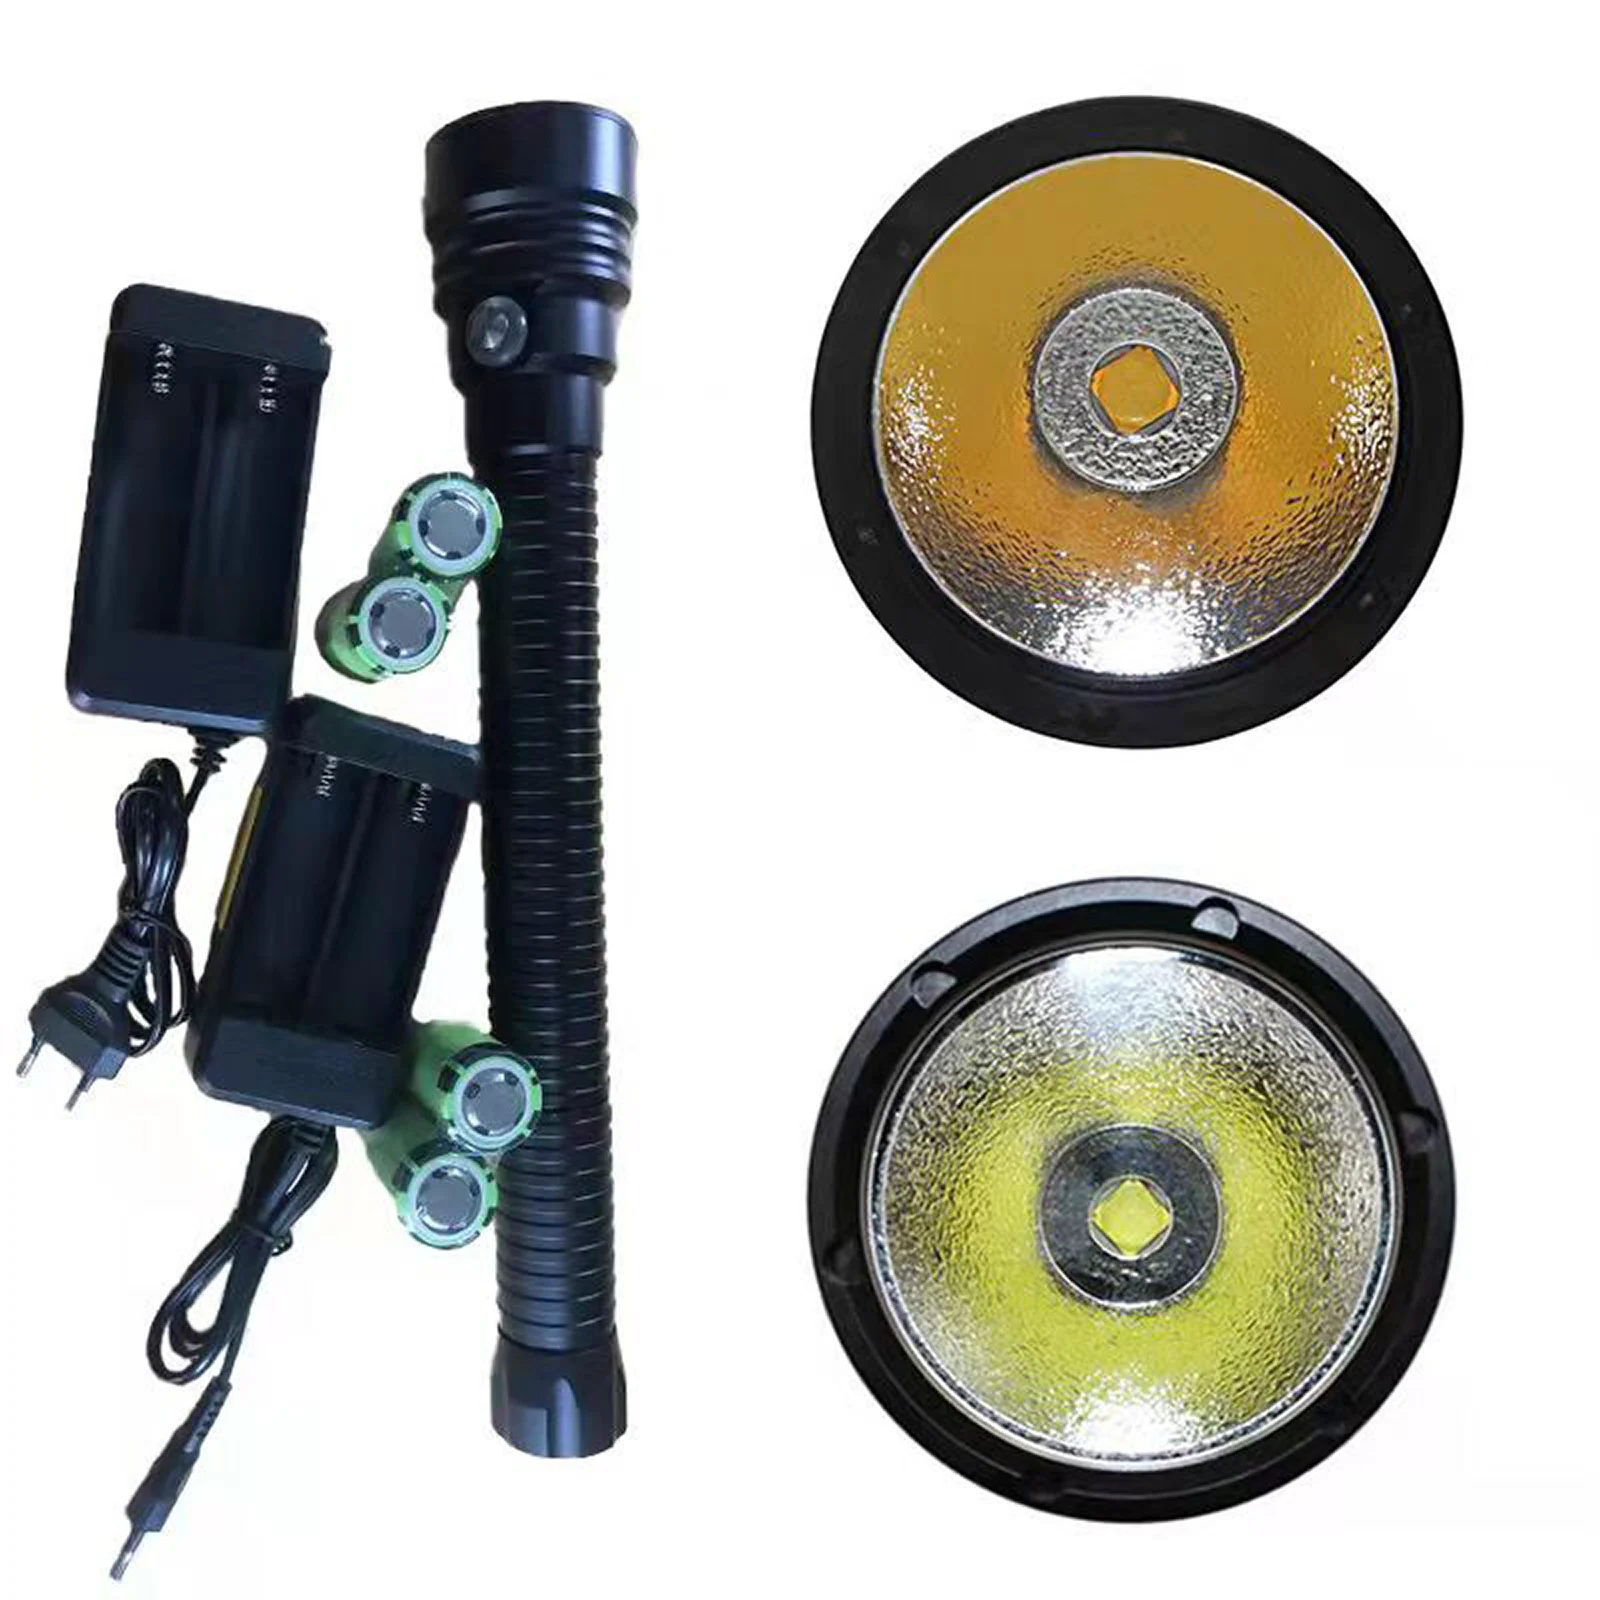 Powerful XHP70.2 led Yellow/White Light 4000 Lumens Diving Flashlight Torch 2/3/4/*26650 battery dive light led underwater xhp70 china factory 12v 100ah lifepo4 battery 24v pack lithium iron phosphate batteries built in bms for solar boat no tax 4000 cycle